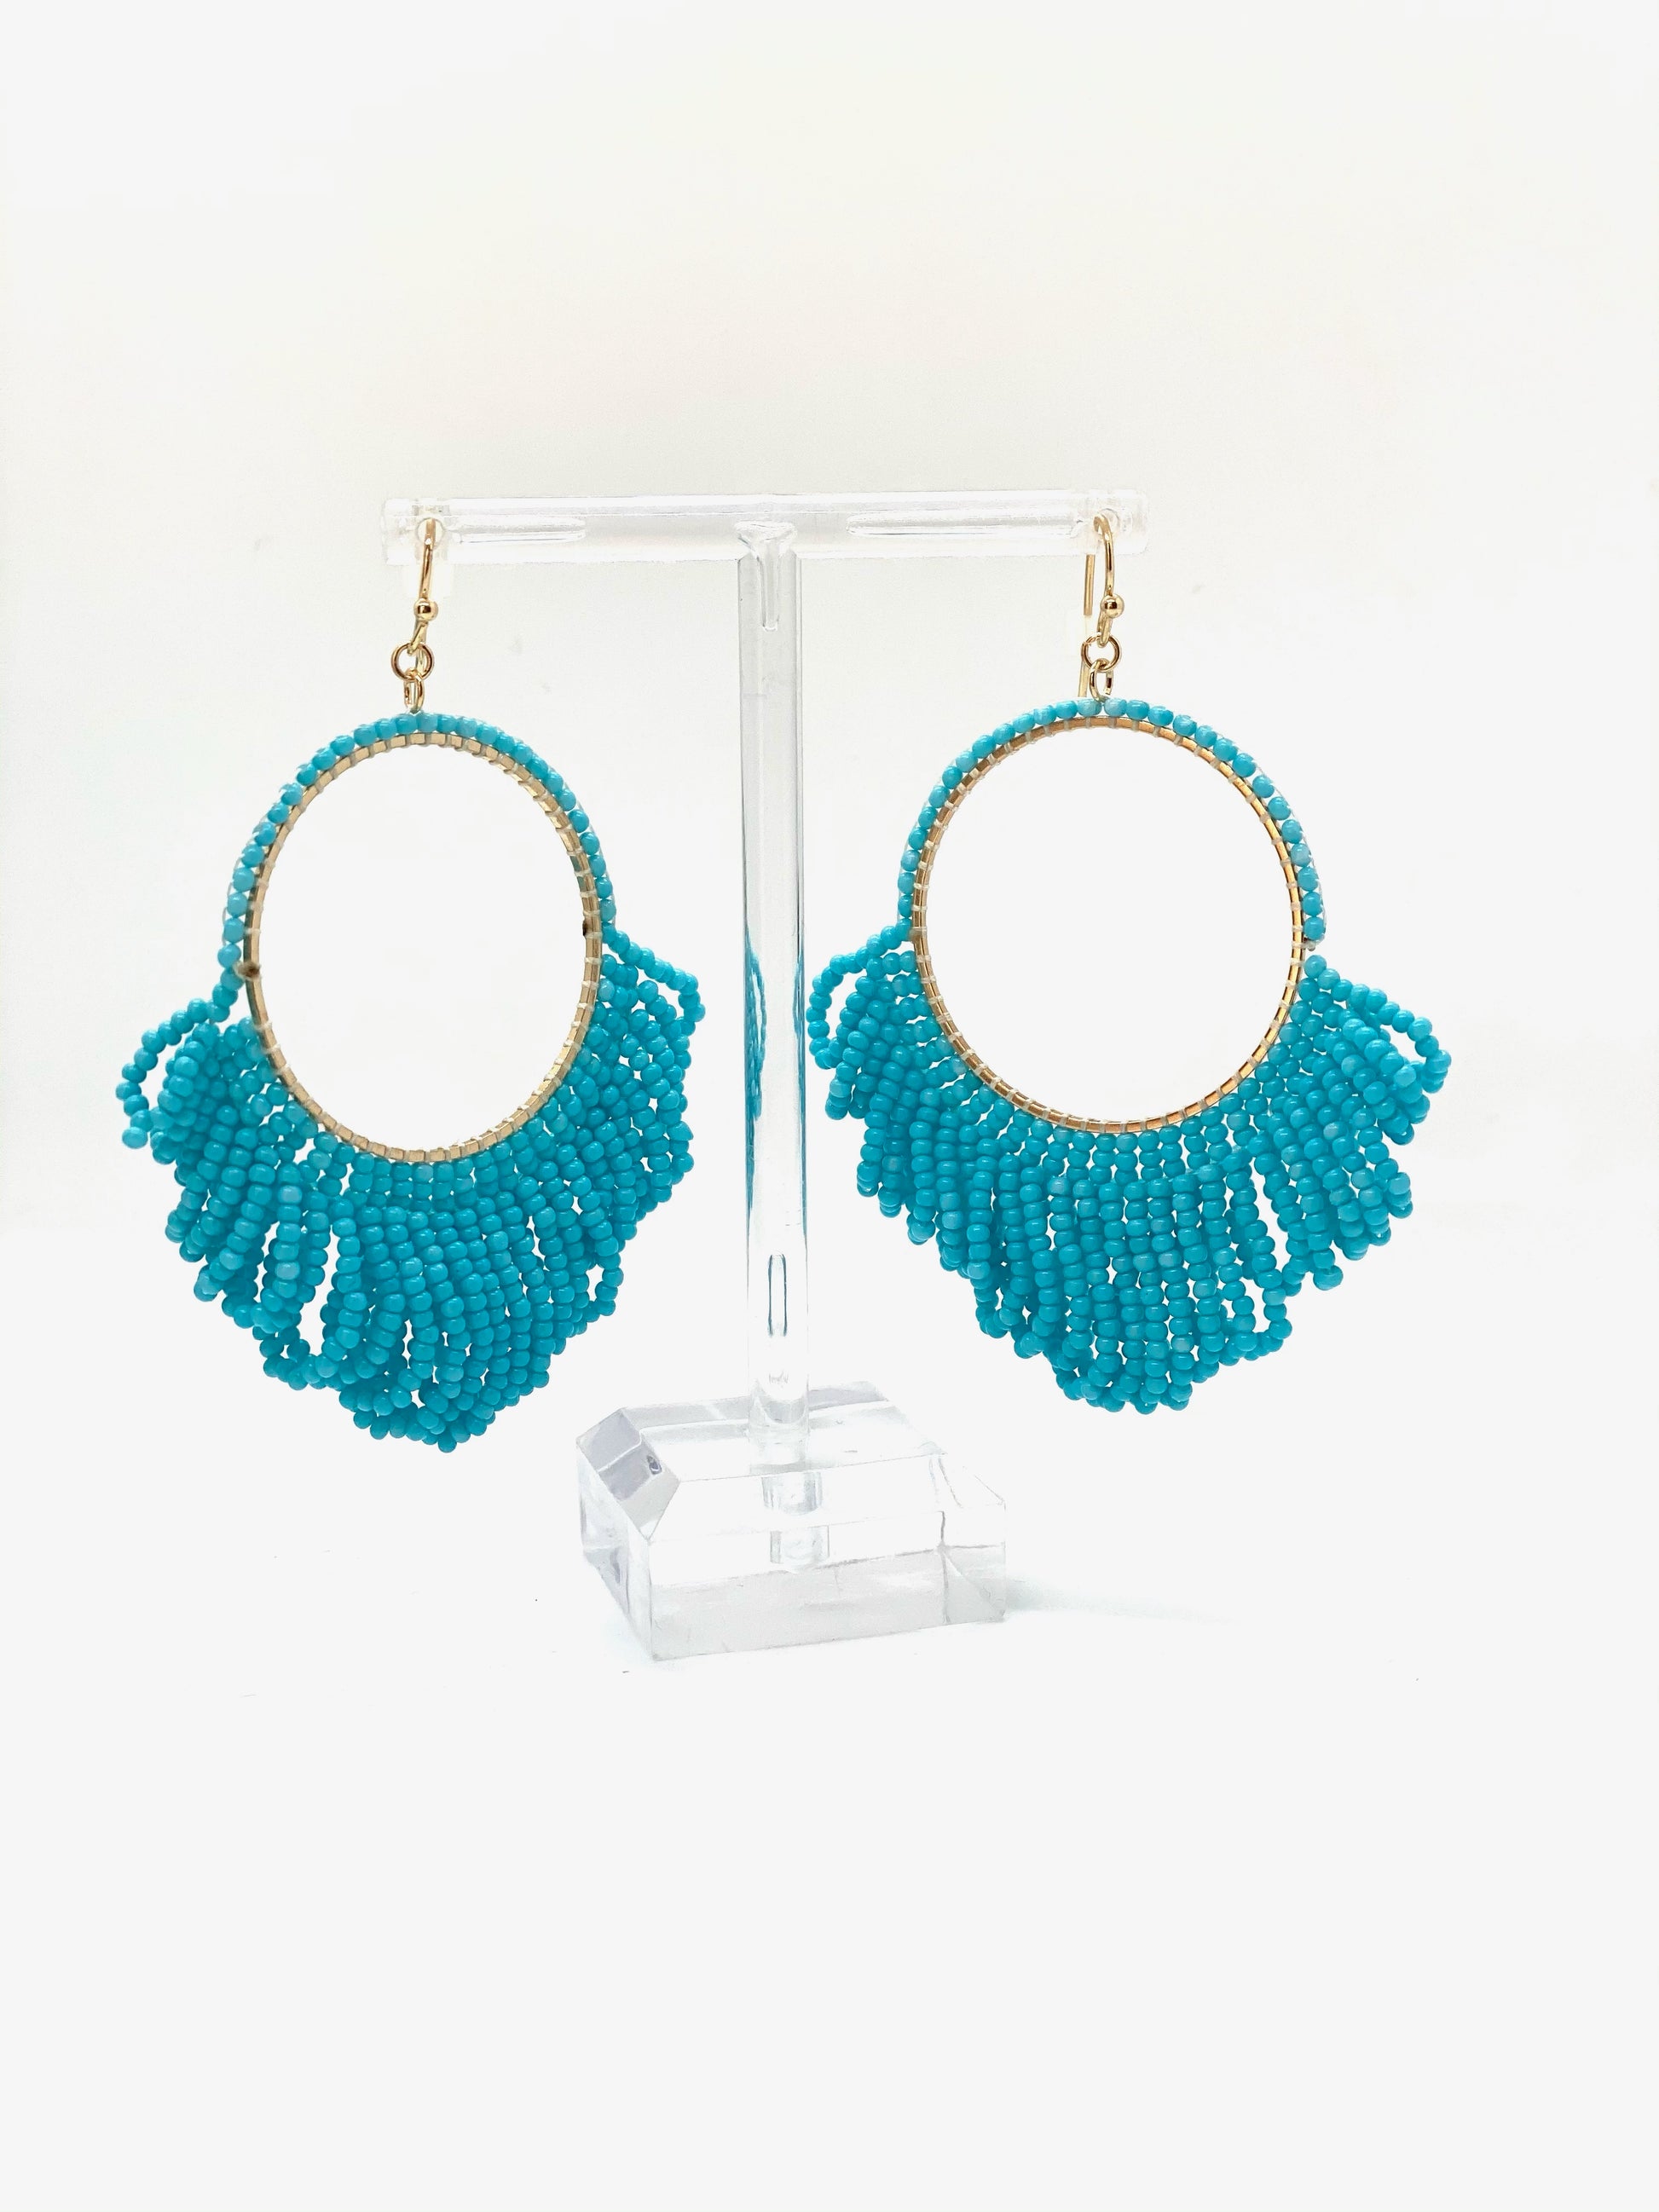 Add some fringe to your favorite outfit with these fun fringe beaded earrings! These earrings feature a gold hardware finish and a fish hook wire closure. Comes in Black or Teal.